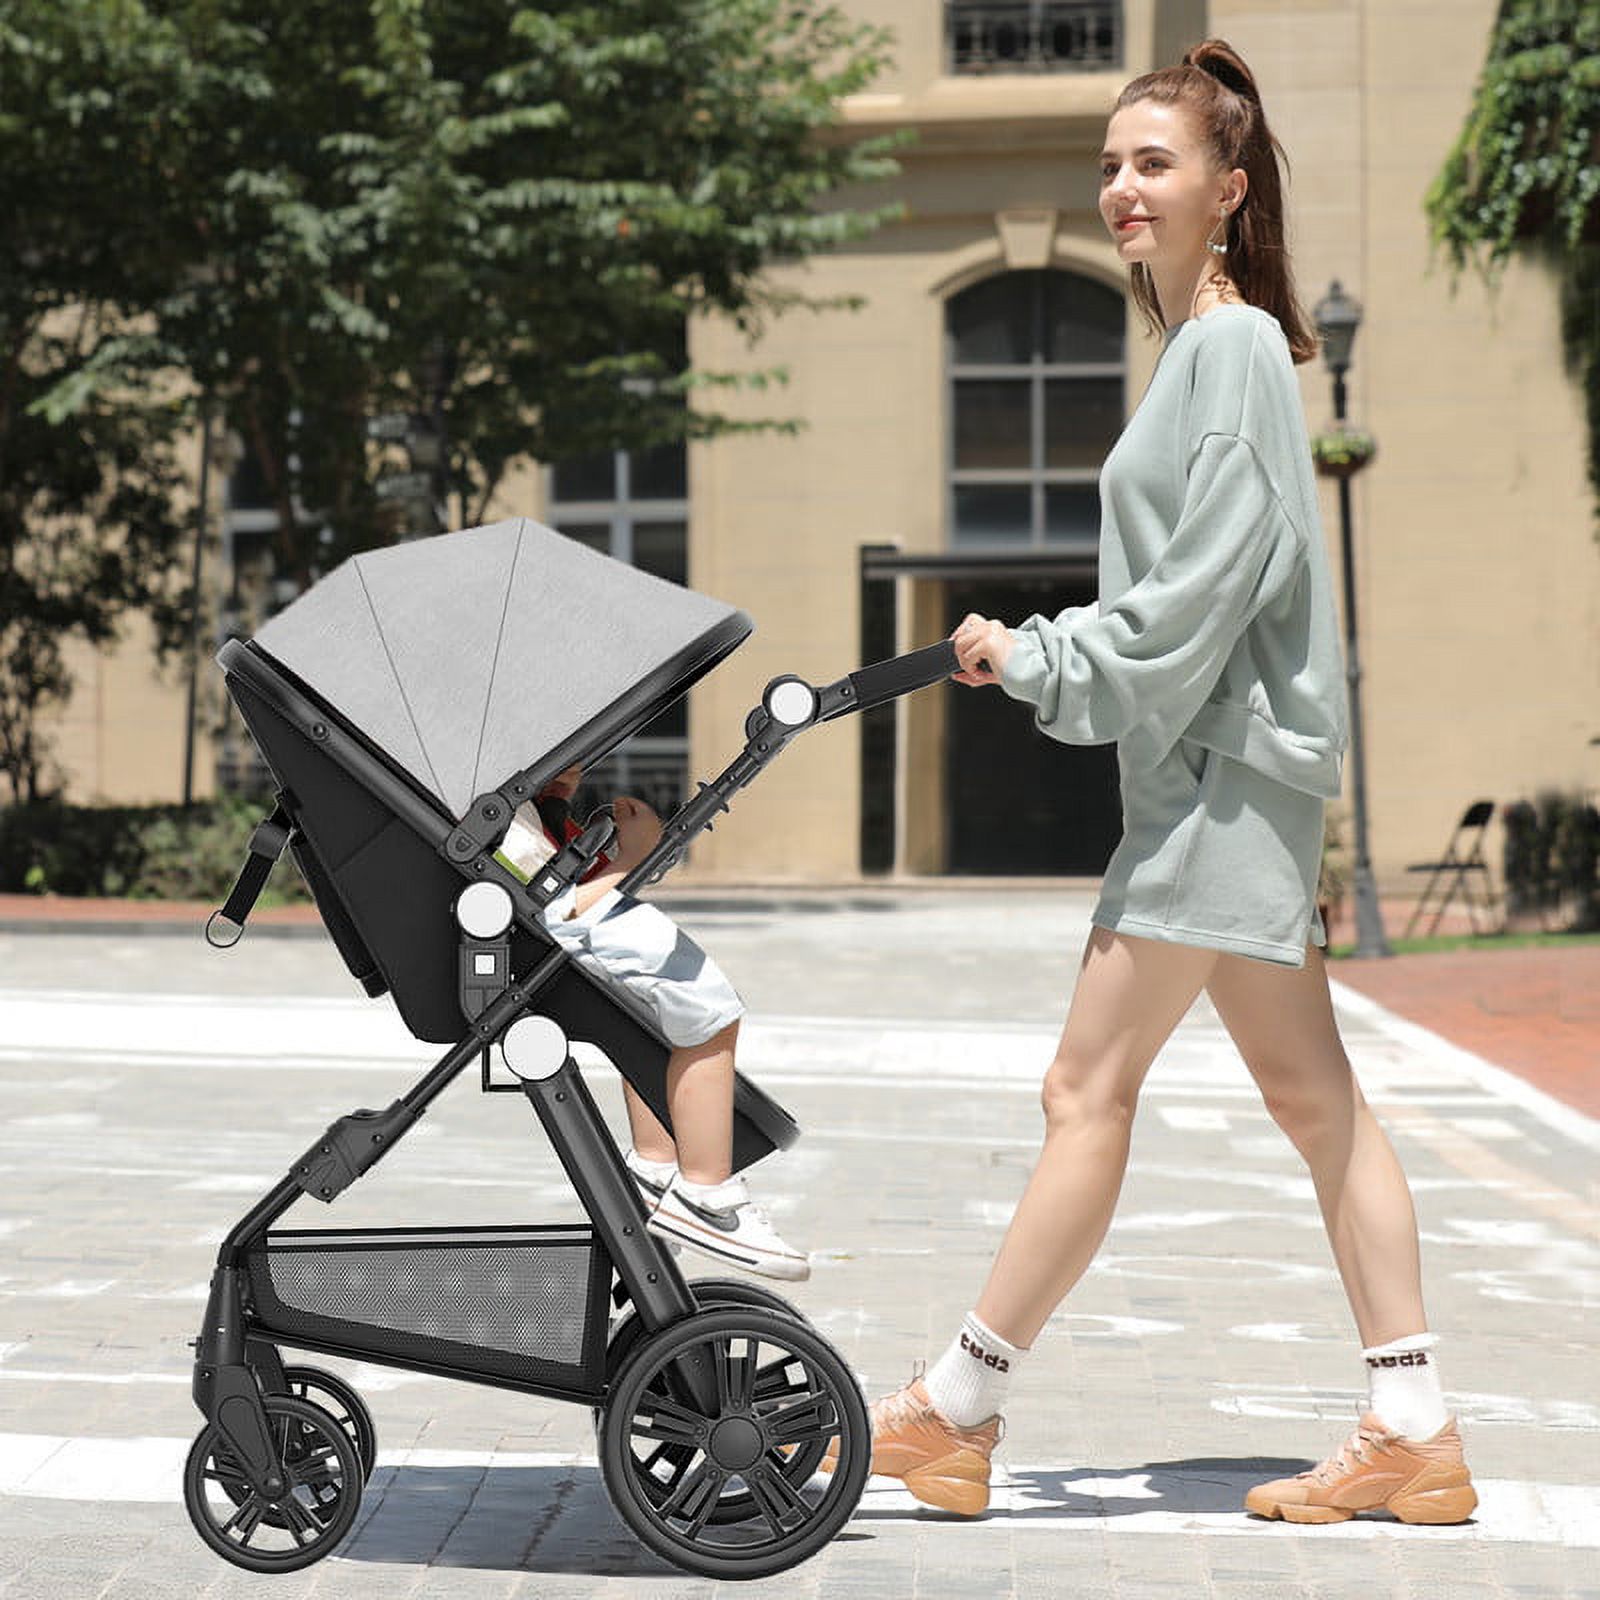 Cynebaby Foldable Baby Newborn Stroller for 0-36 Months Old Babies, Gray - image 3 of 10